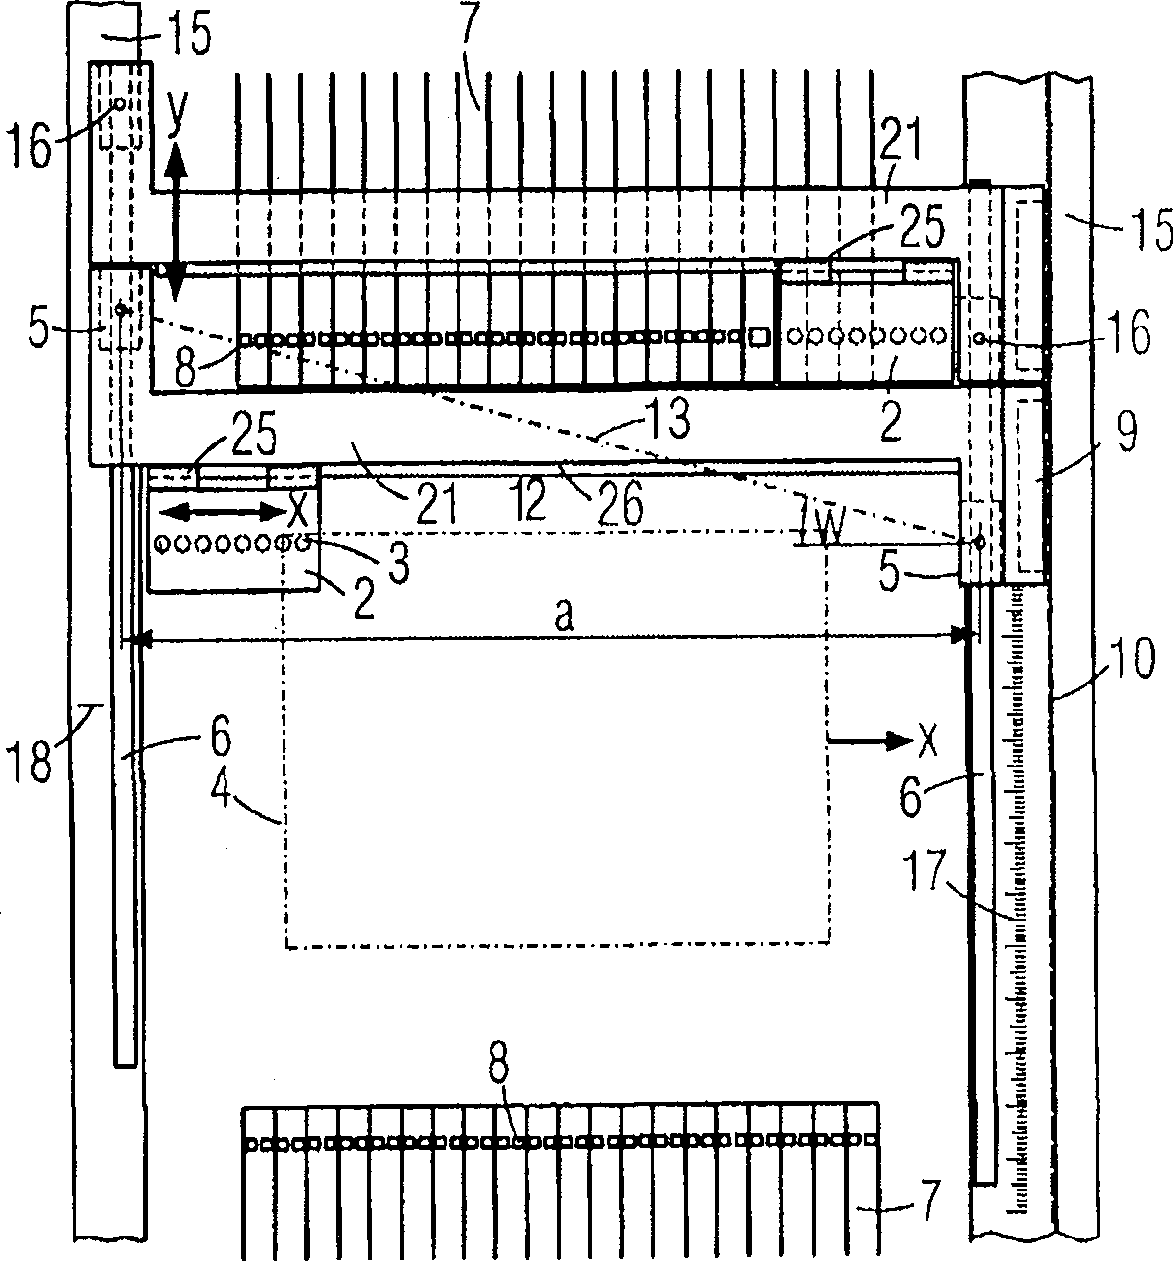 Positioning device with positioning unit capable of linearity moving